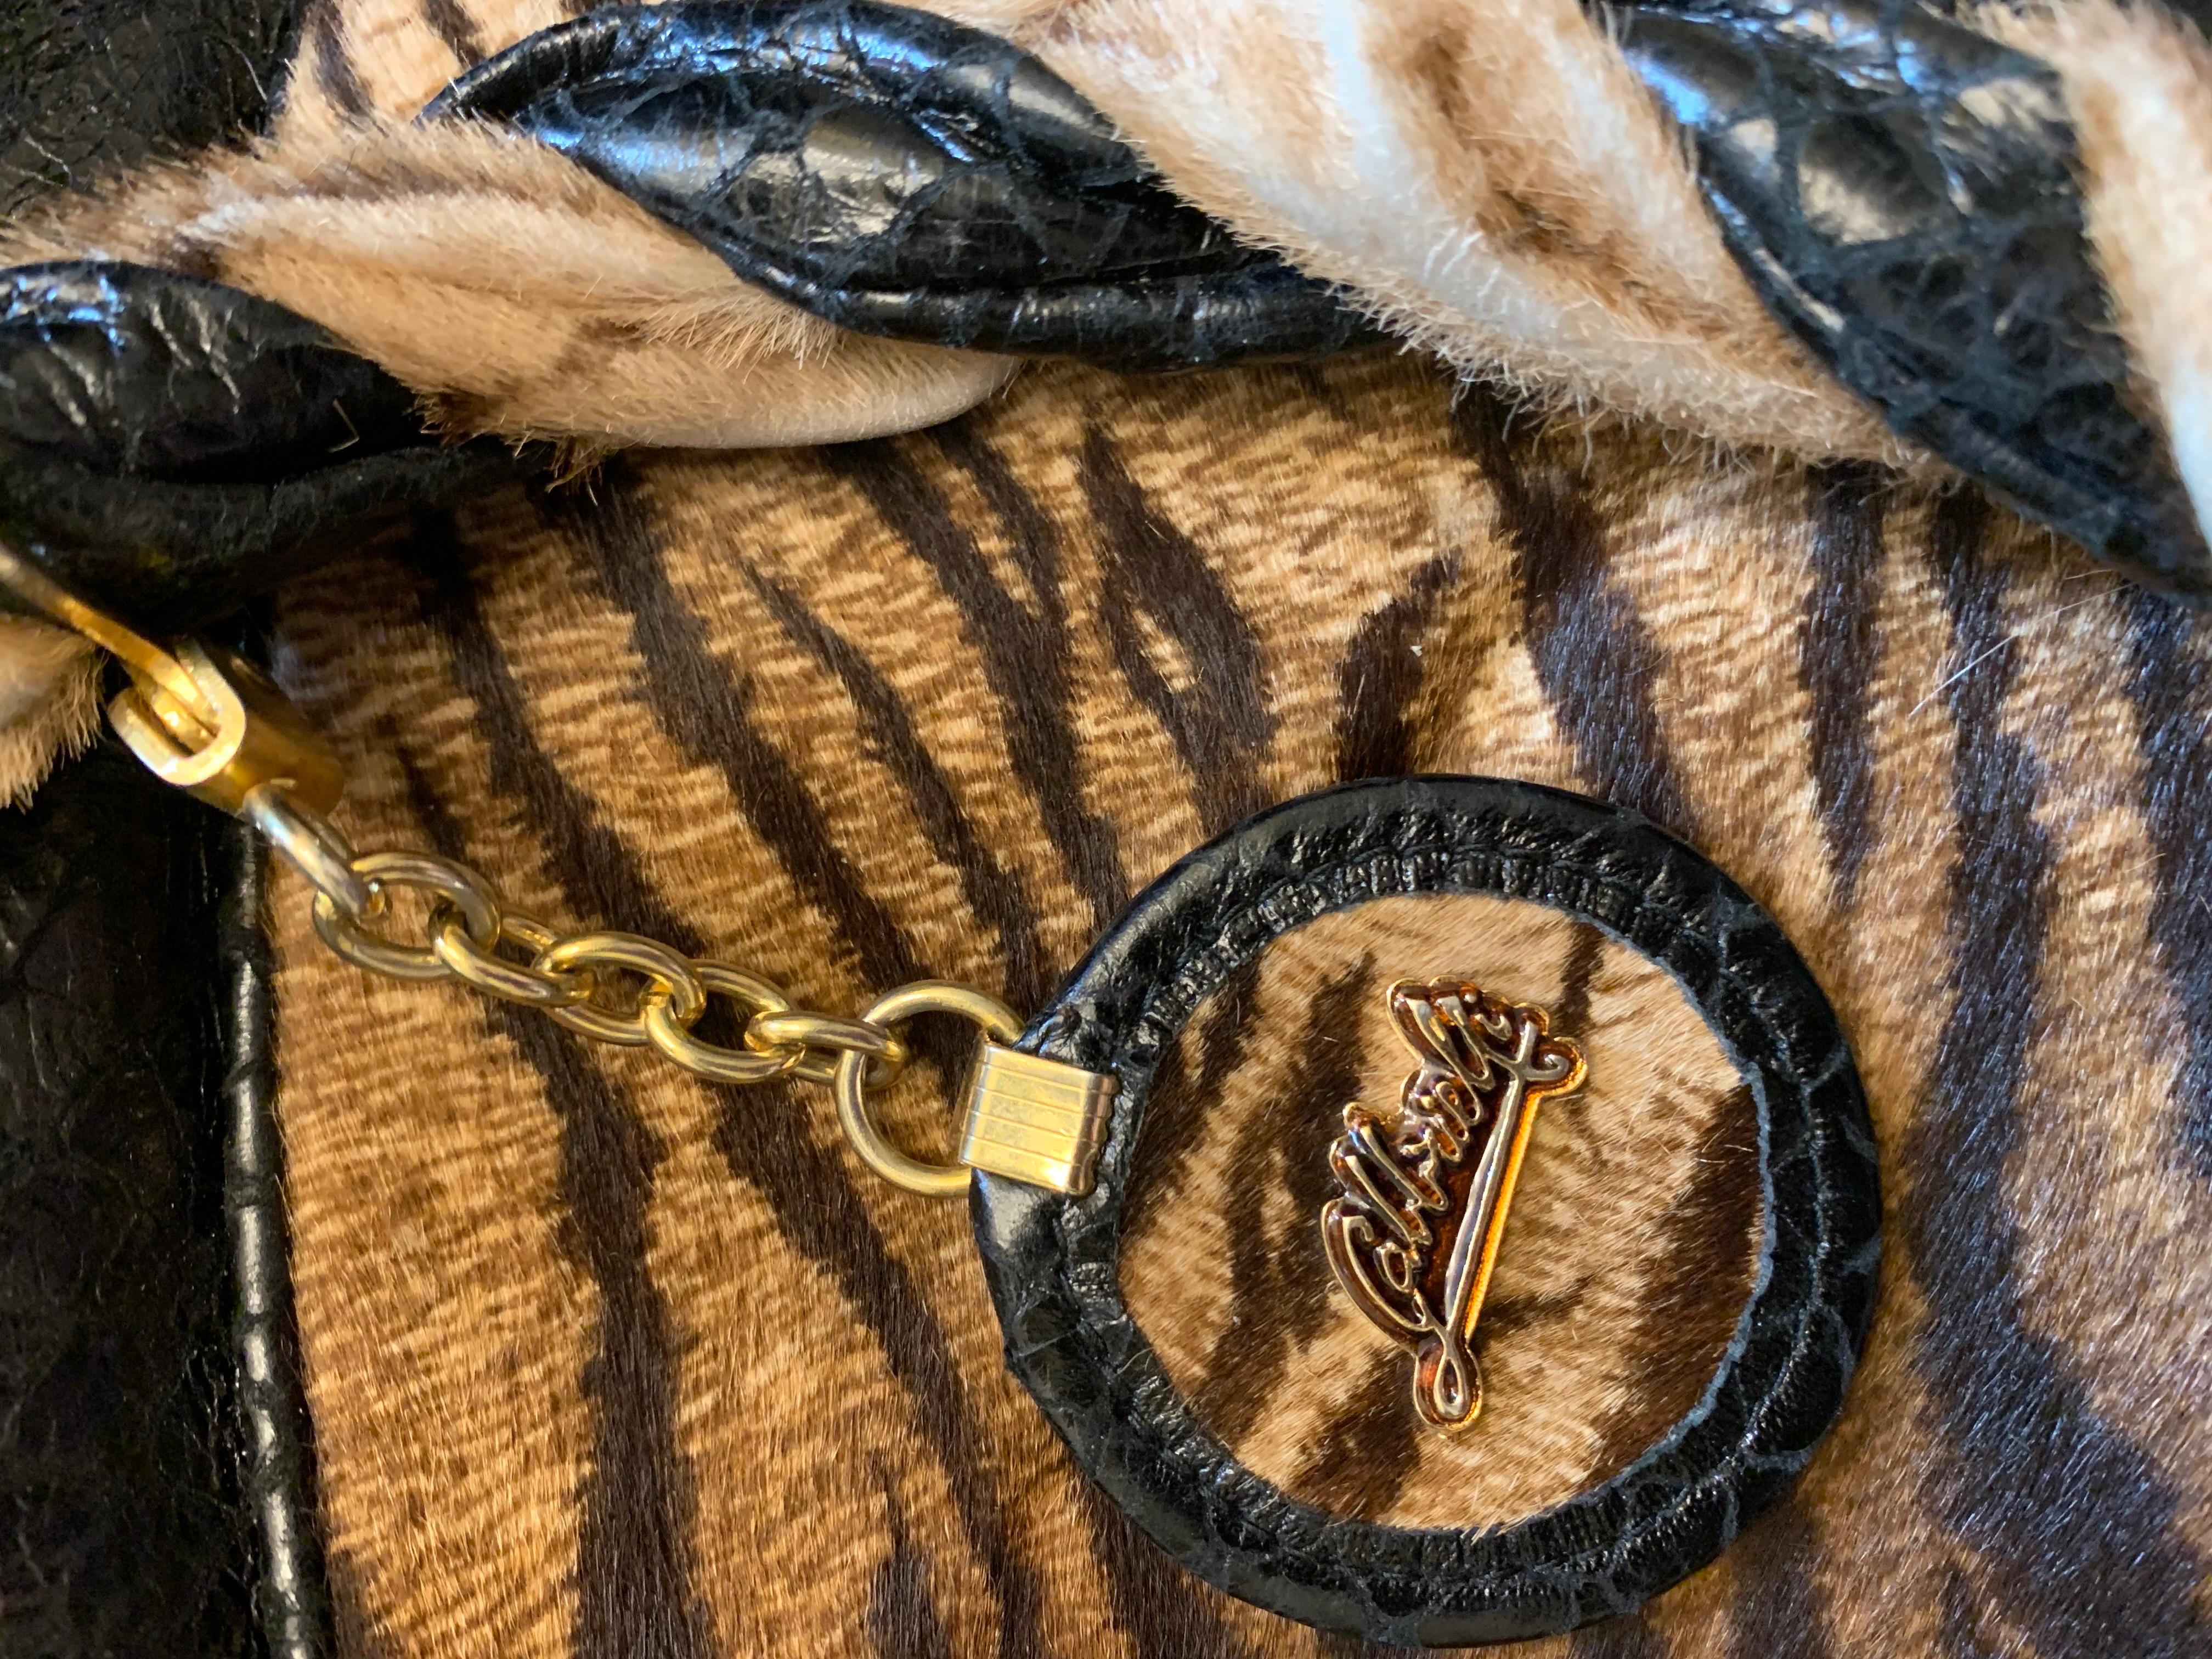 A vintage 1990s canoe shaped handbag by Firenze Italian maker Gabbrielli. The bag is a mix of brown zebra print pony hair leather and black embossed leather that looks like real snakeskin. The handle hardware is spectacular. Heavy with gold trim.